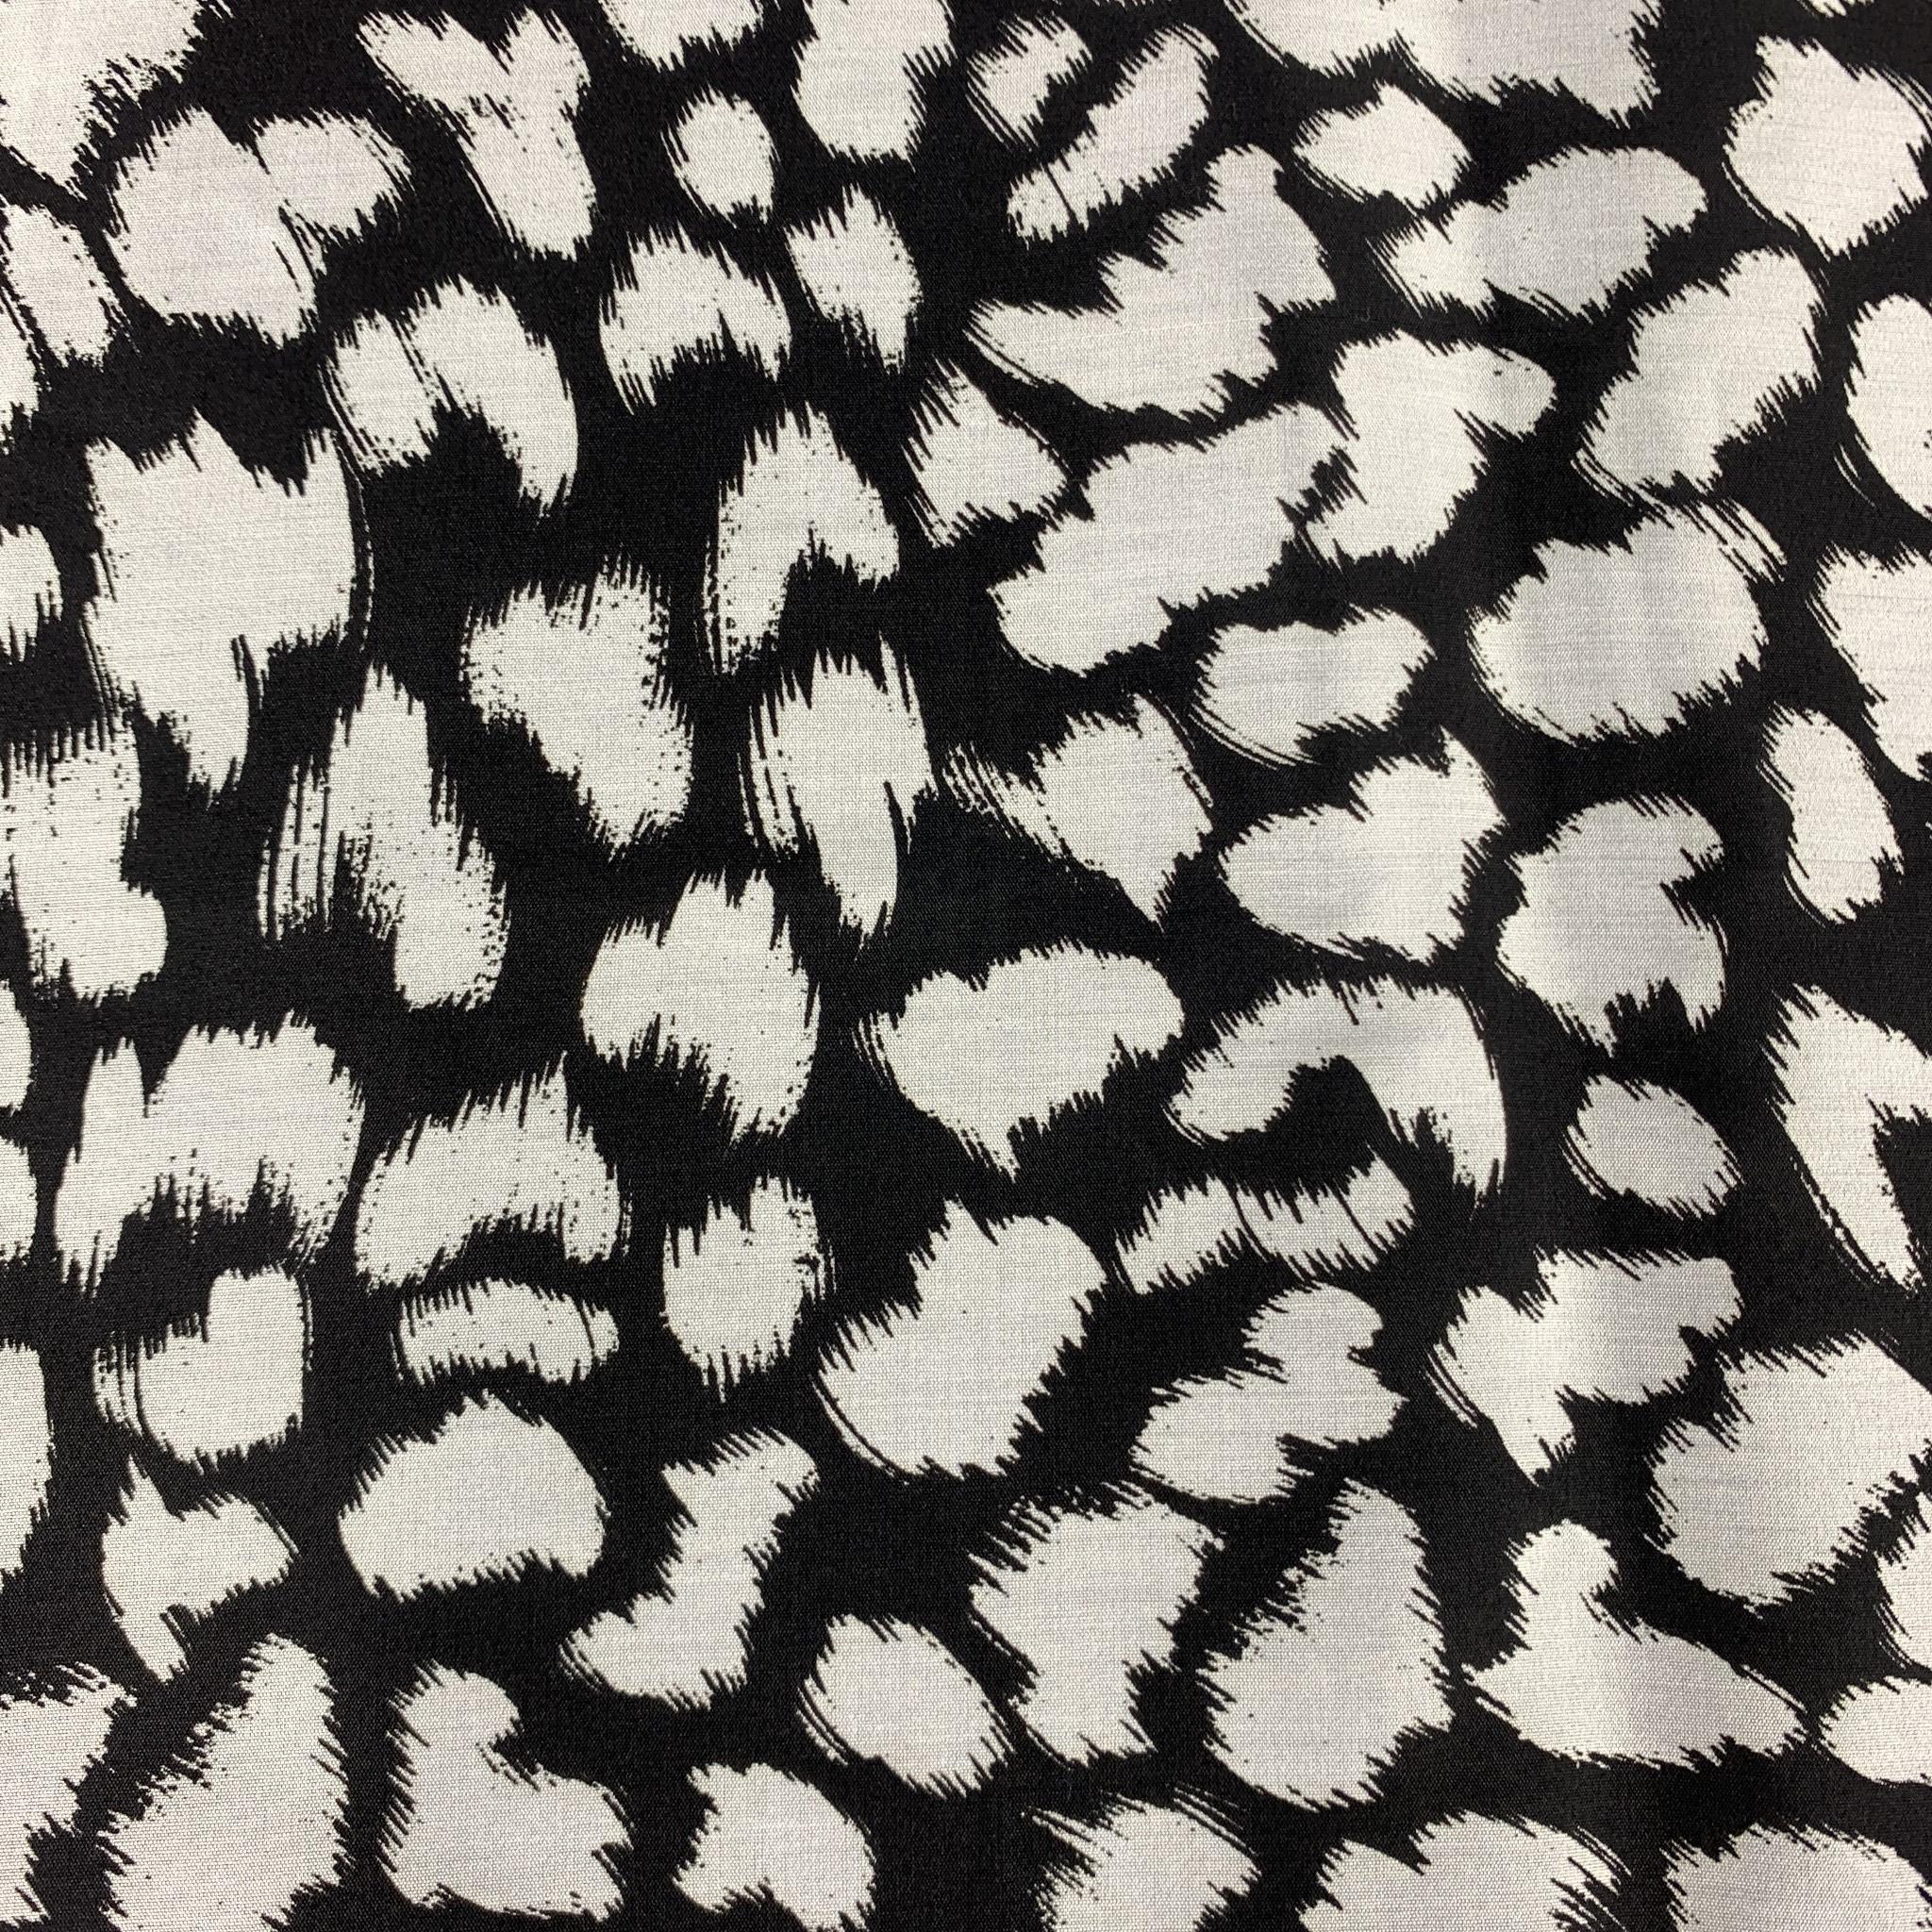 TOM FORD pocket square comes in a black & white spot print silk. Made in Italy.

Excellent Pre-Owned Condition.
Original Retail Price: $190.00

Measurements:

15.5 in. x 15 in. 